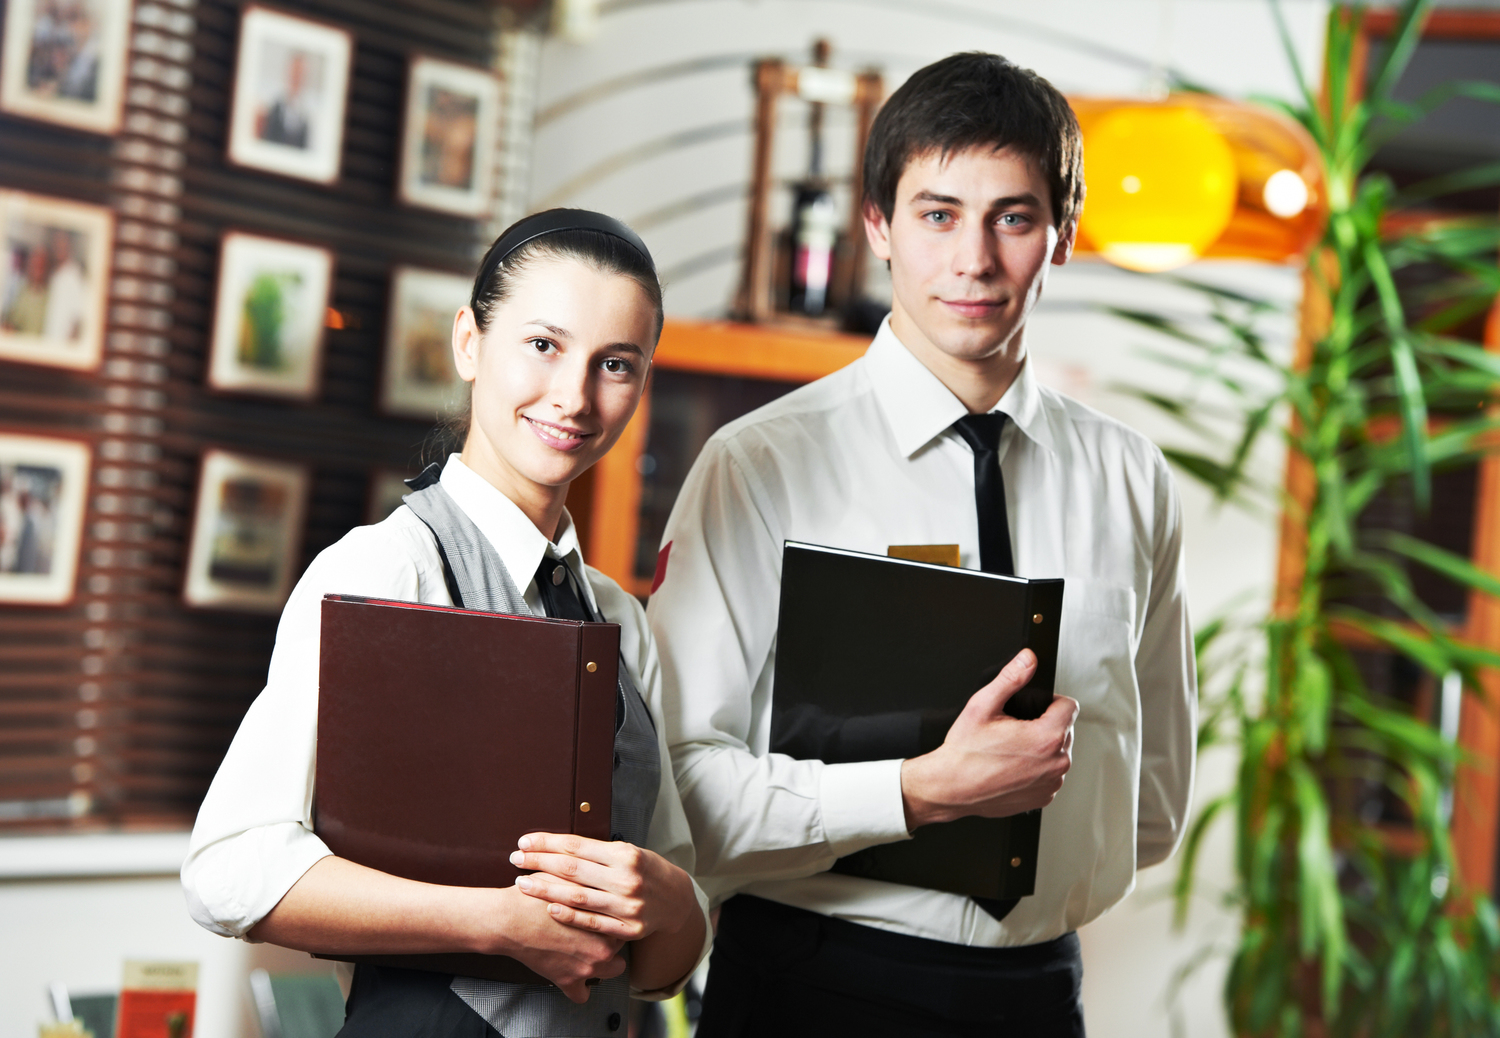 Waitress girl and waiter man of commercial restaurant in uniform waiting an order with menu